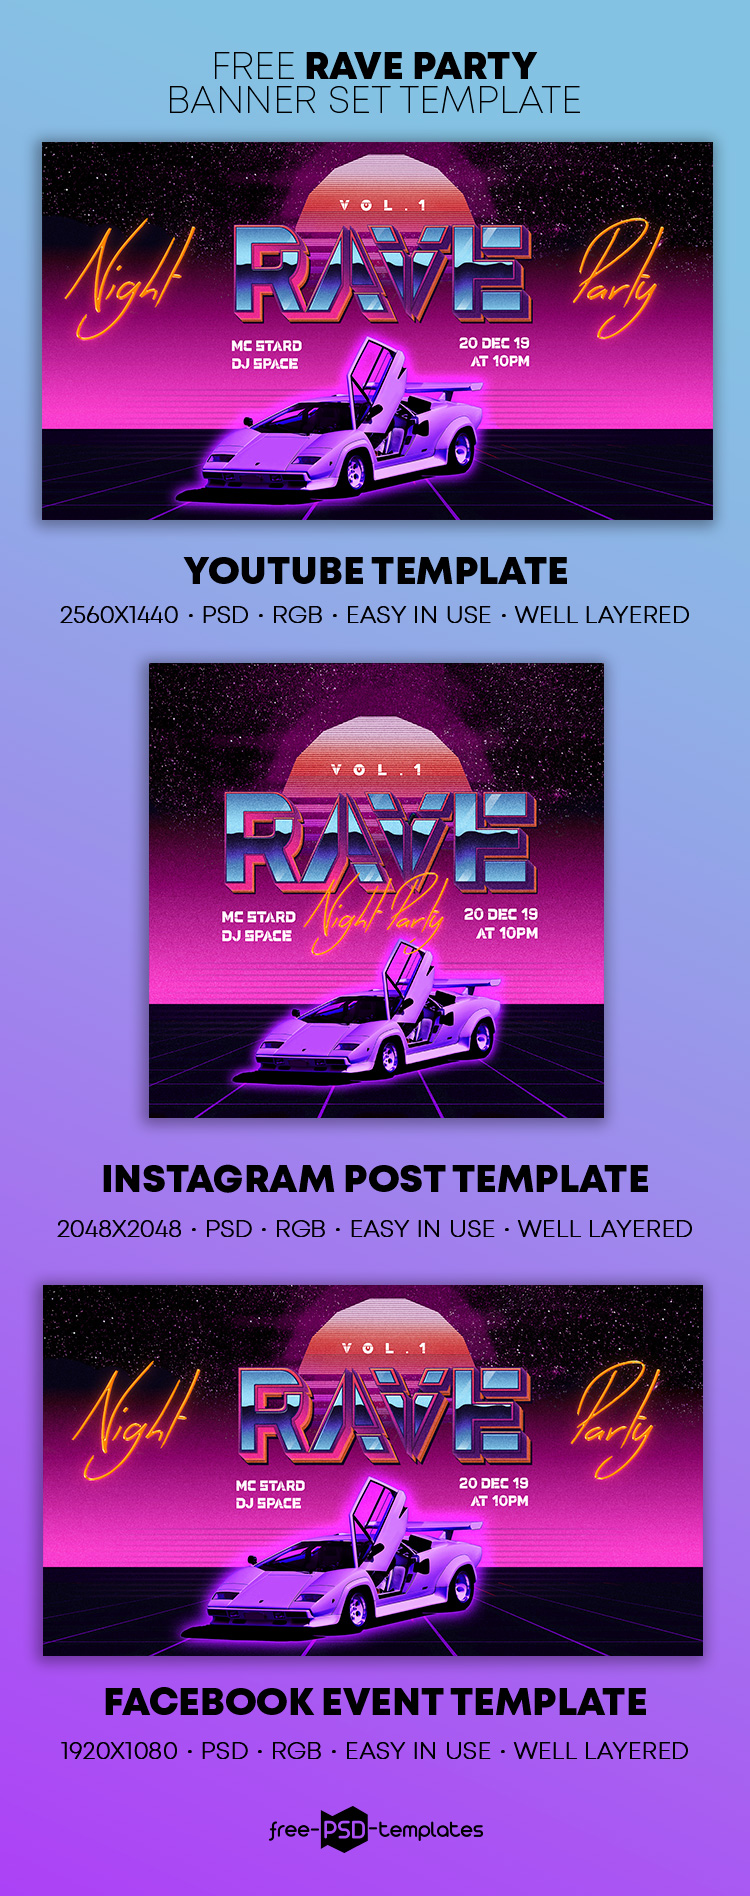 Download Free Rave Party Banner Set Template | Free PSD Templates